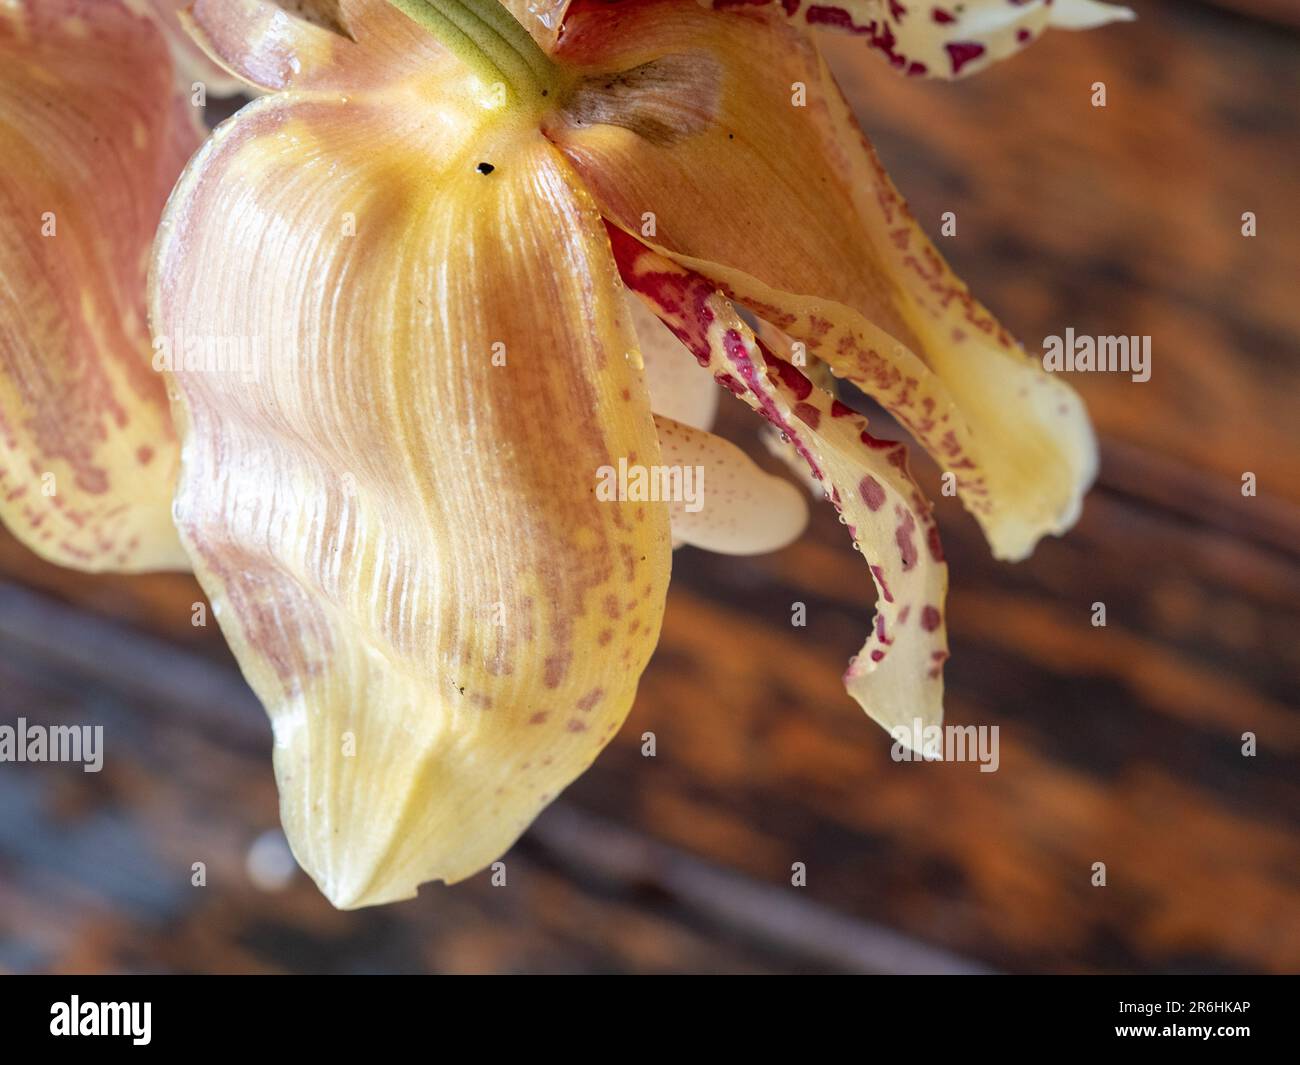 Yellow and red patterned Stanhopea Orchid flower petals from behind, Australian coastal garden Stock Photo